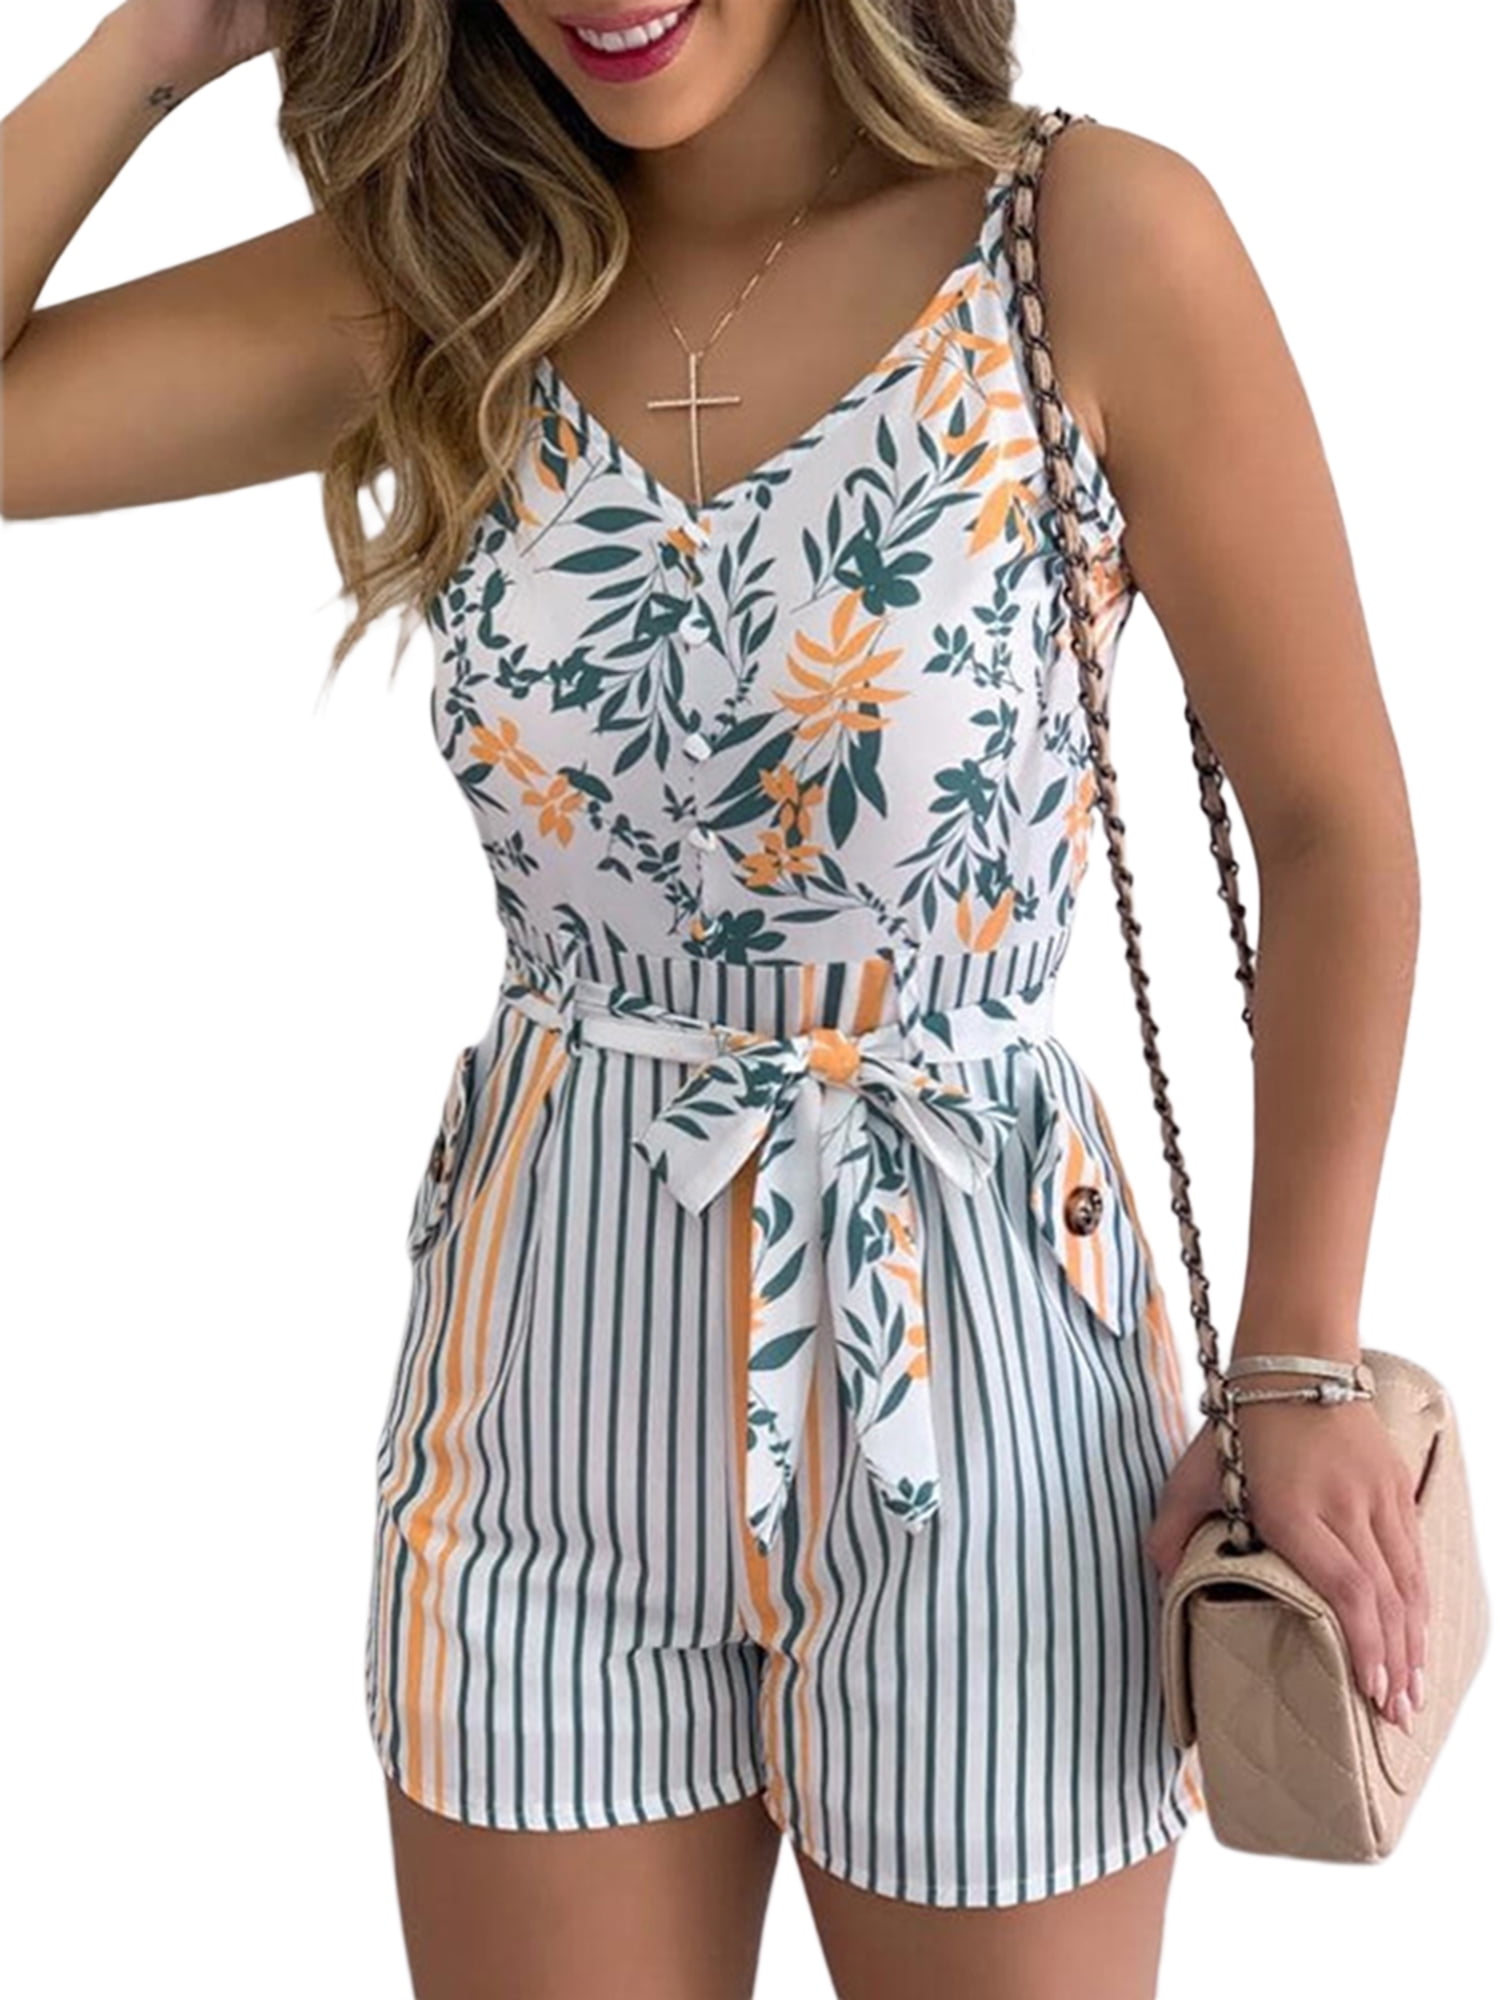 Small boobs + rompers = sexy, carefree, chic, cute, and fun